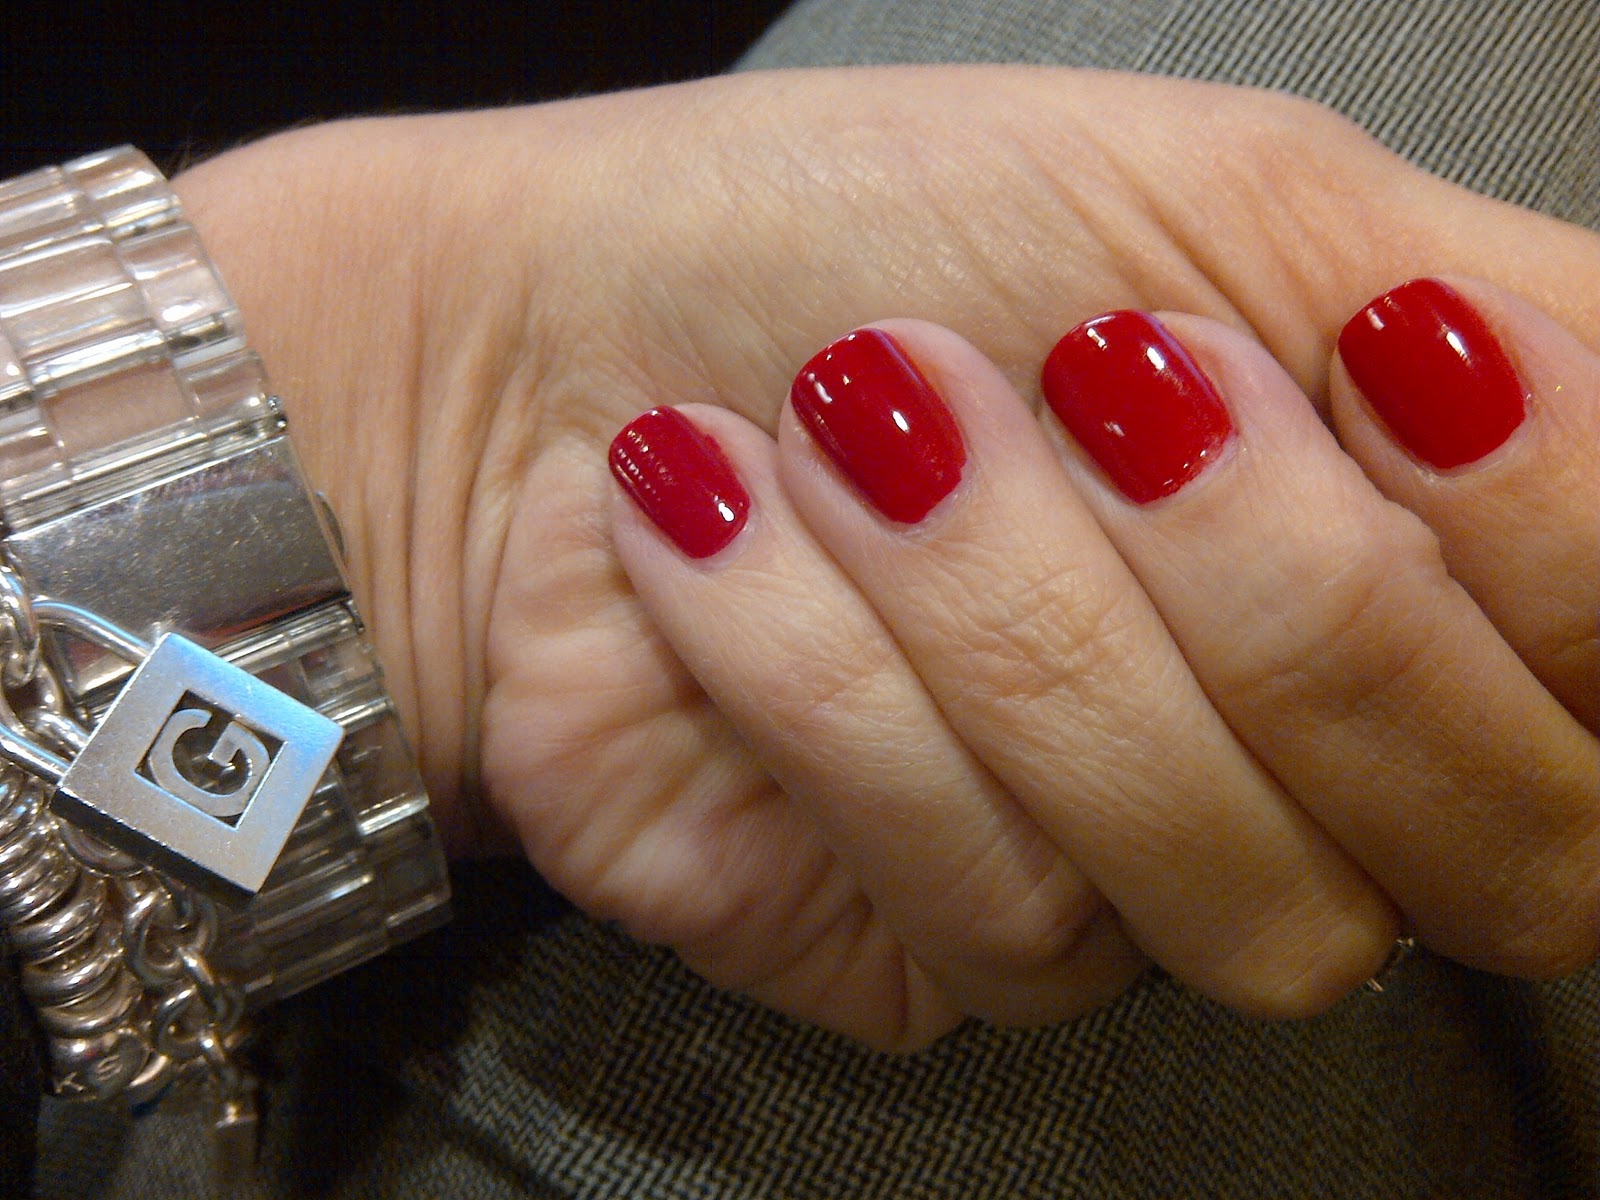 OPI Nail Lacquer in "Big Apple Red" - wide 8